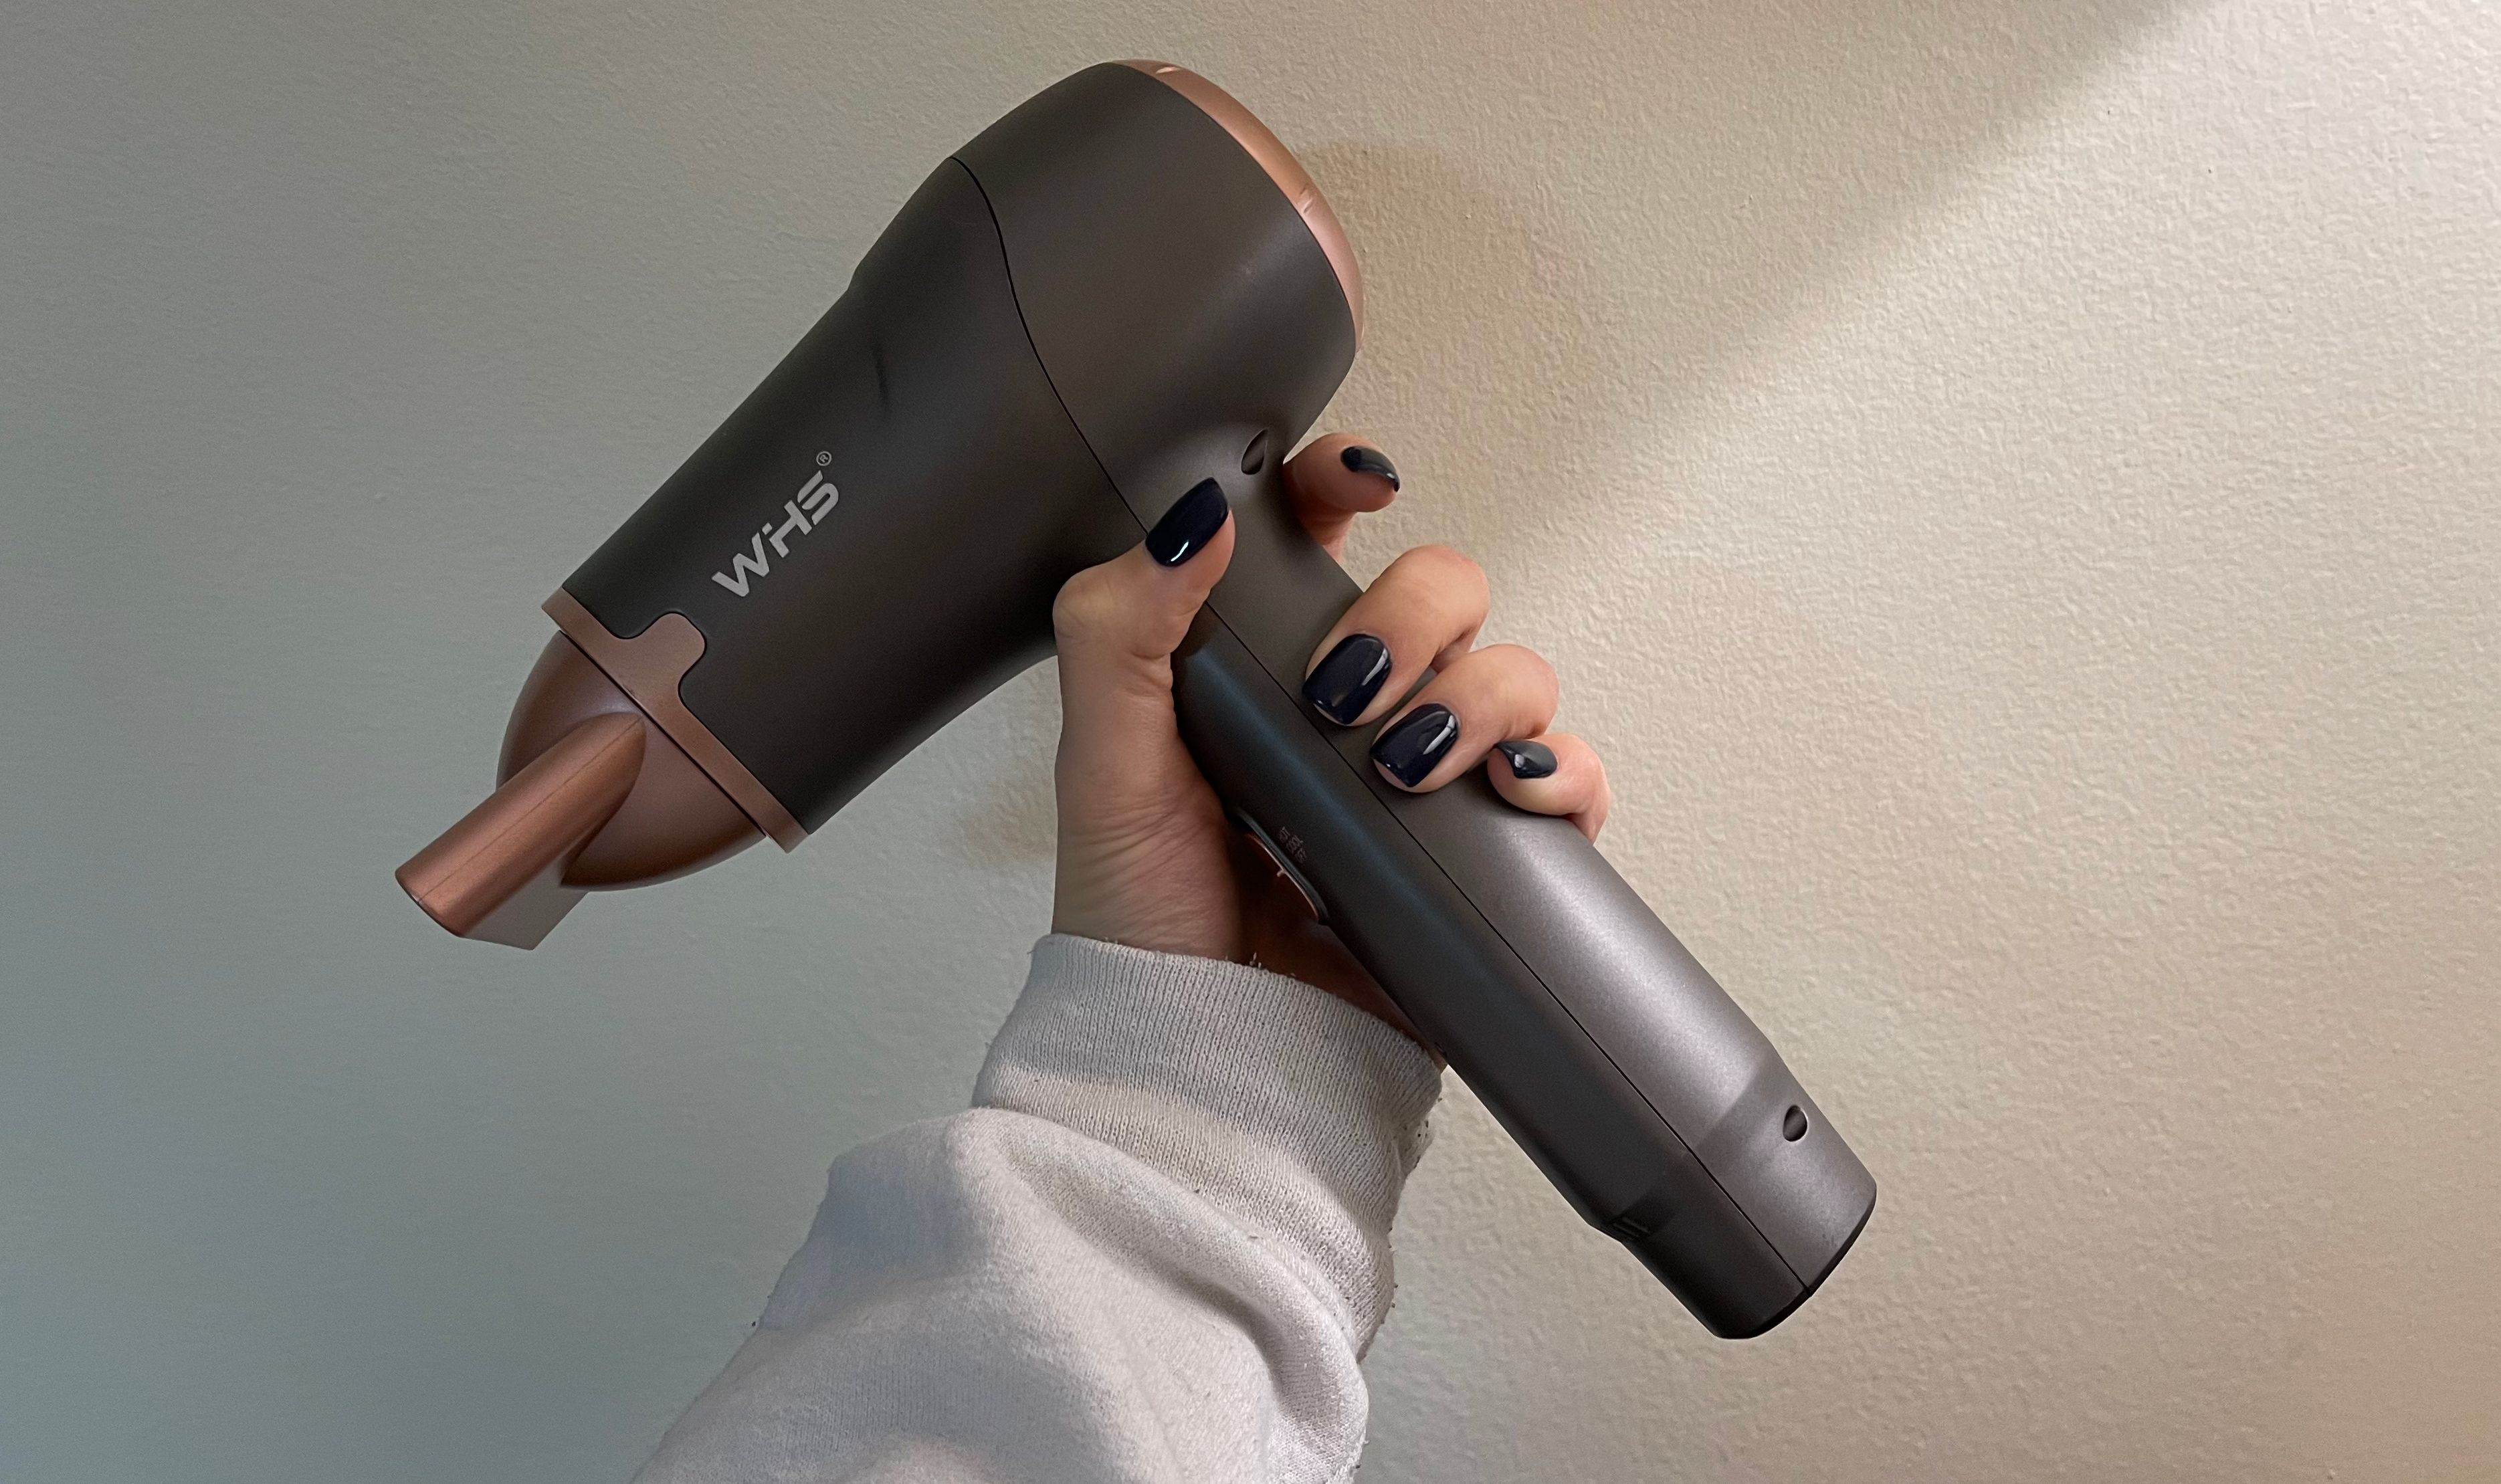 This cordless blow dryer makes styling your hair simple | CNN Underscored